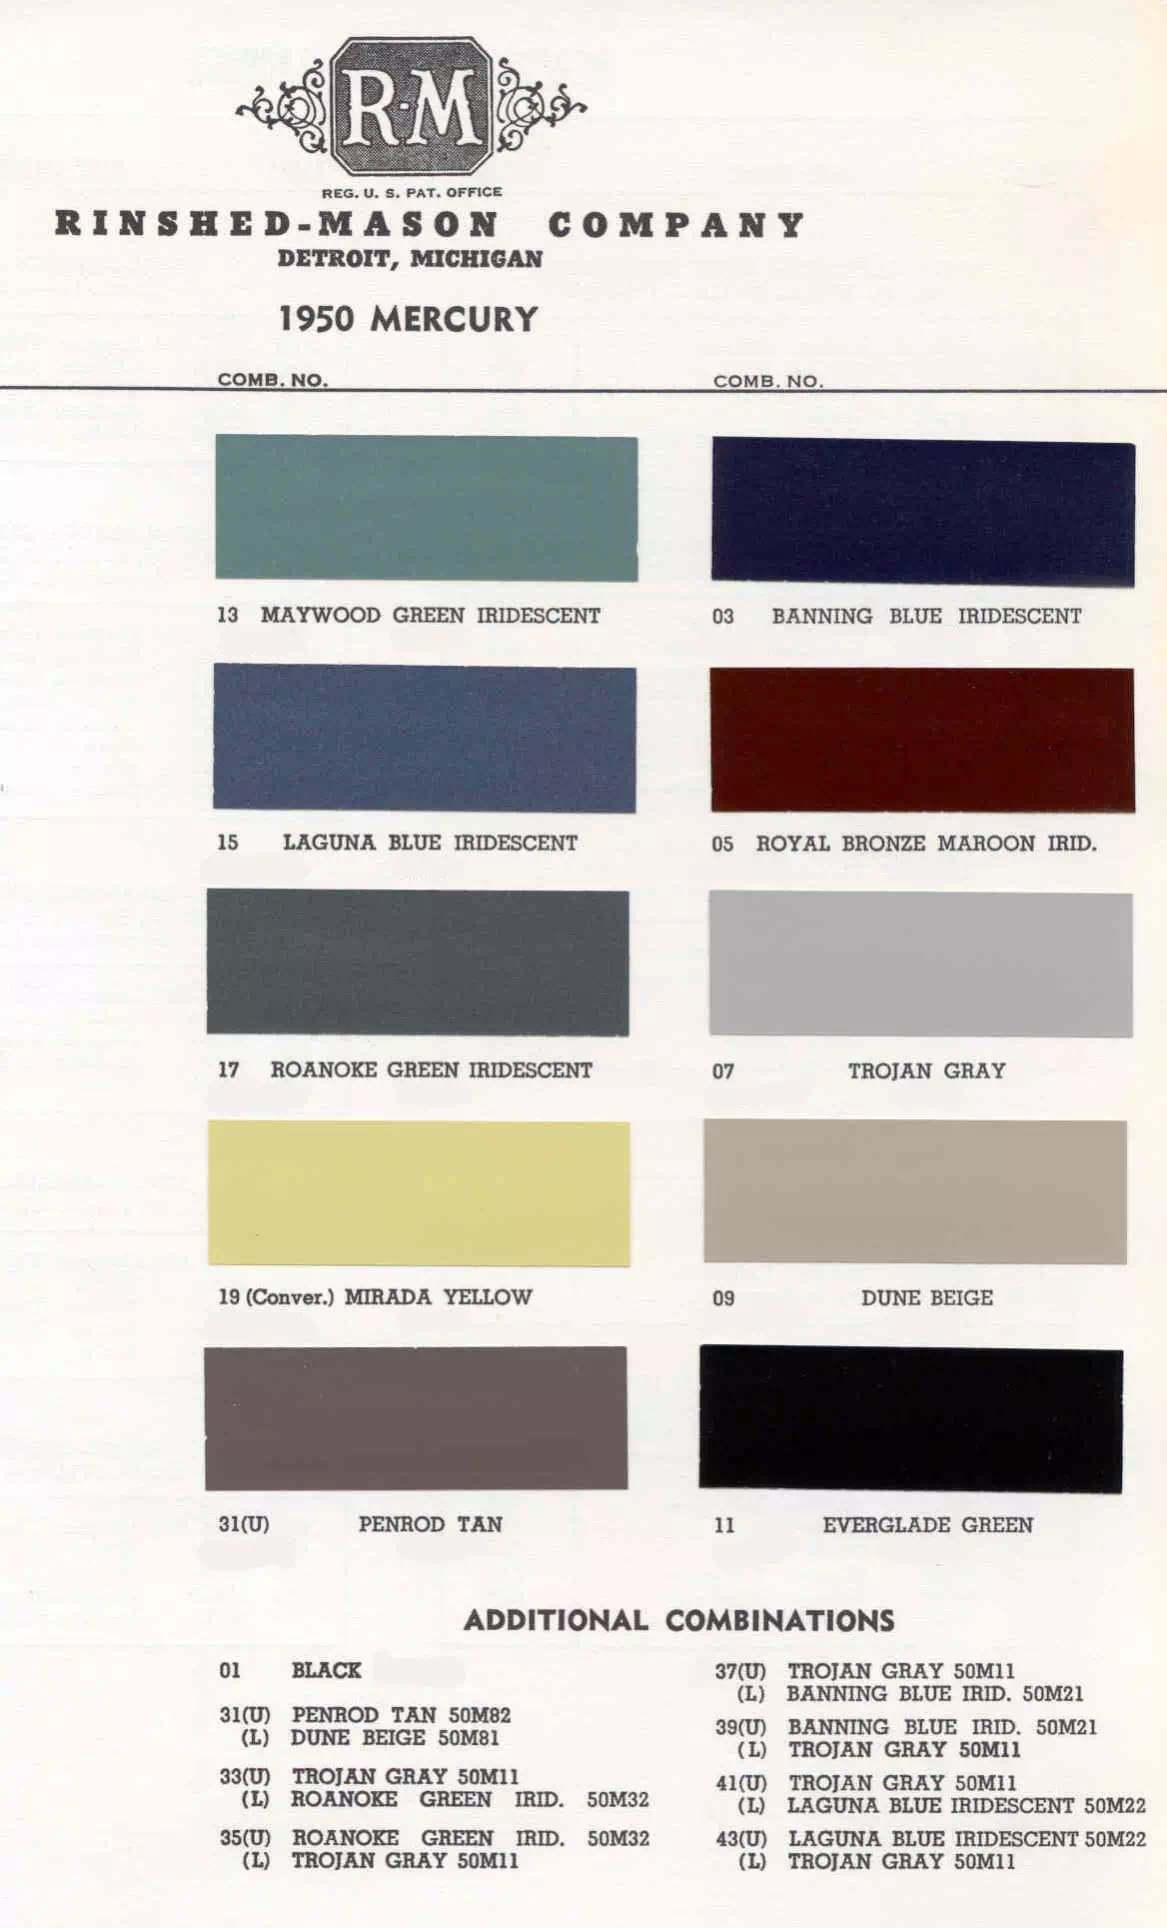 exterior colors, thier codes, and example swatches used on the exterior of the vehicles in 1950